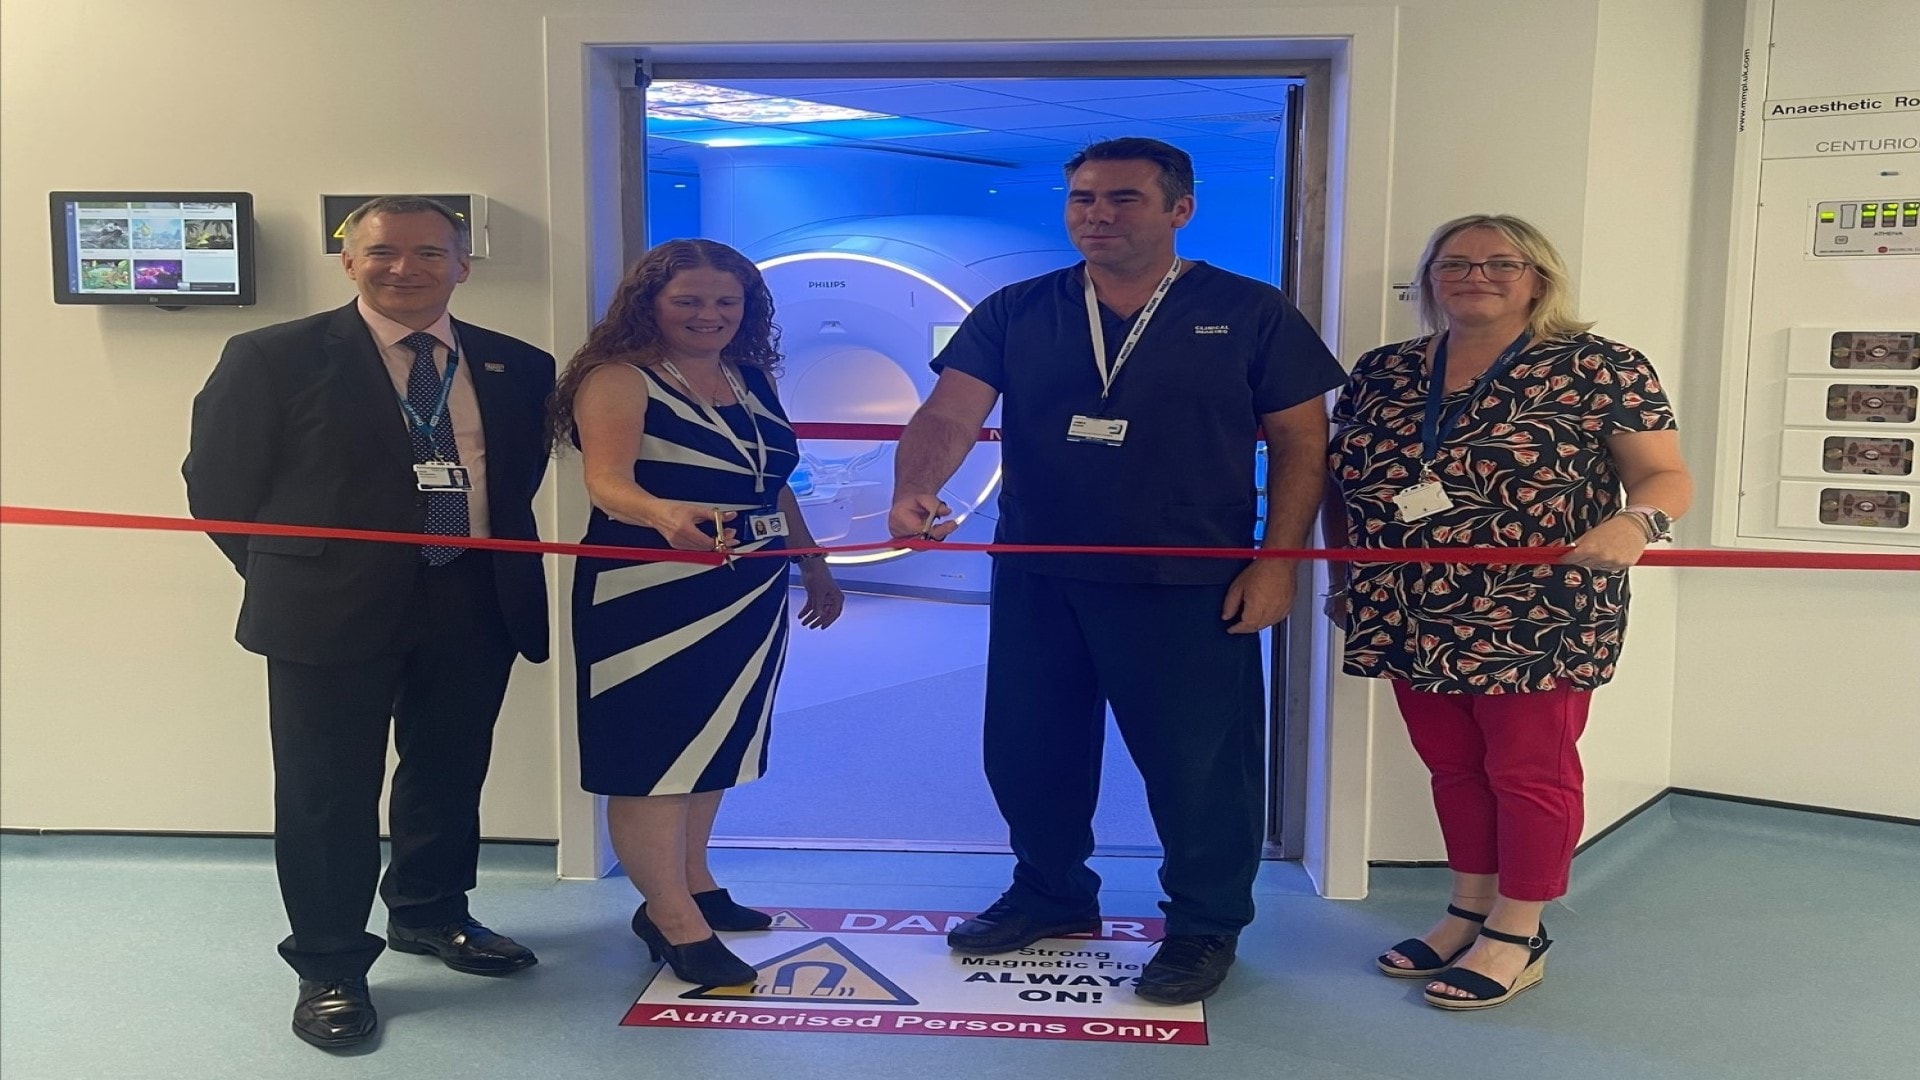 New 21st Century Scanning Suite and Dedicated Haematology/Oncology Ward with Philips Ambient Experience opens at Royal Cornwall Hospital